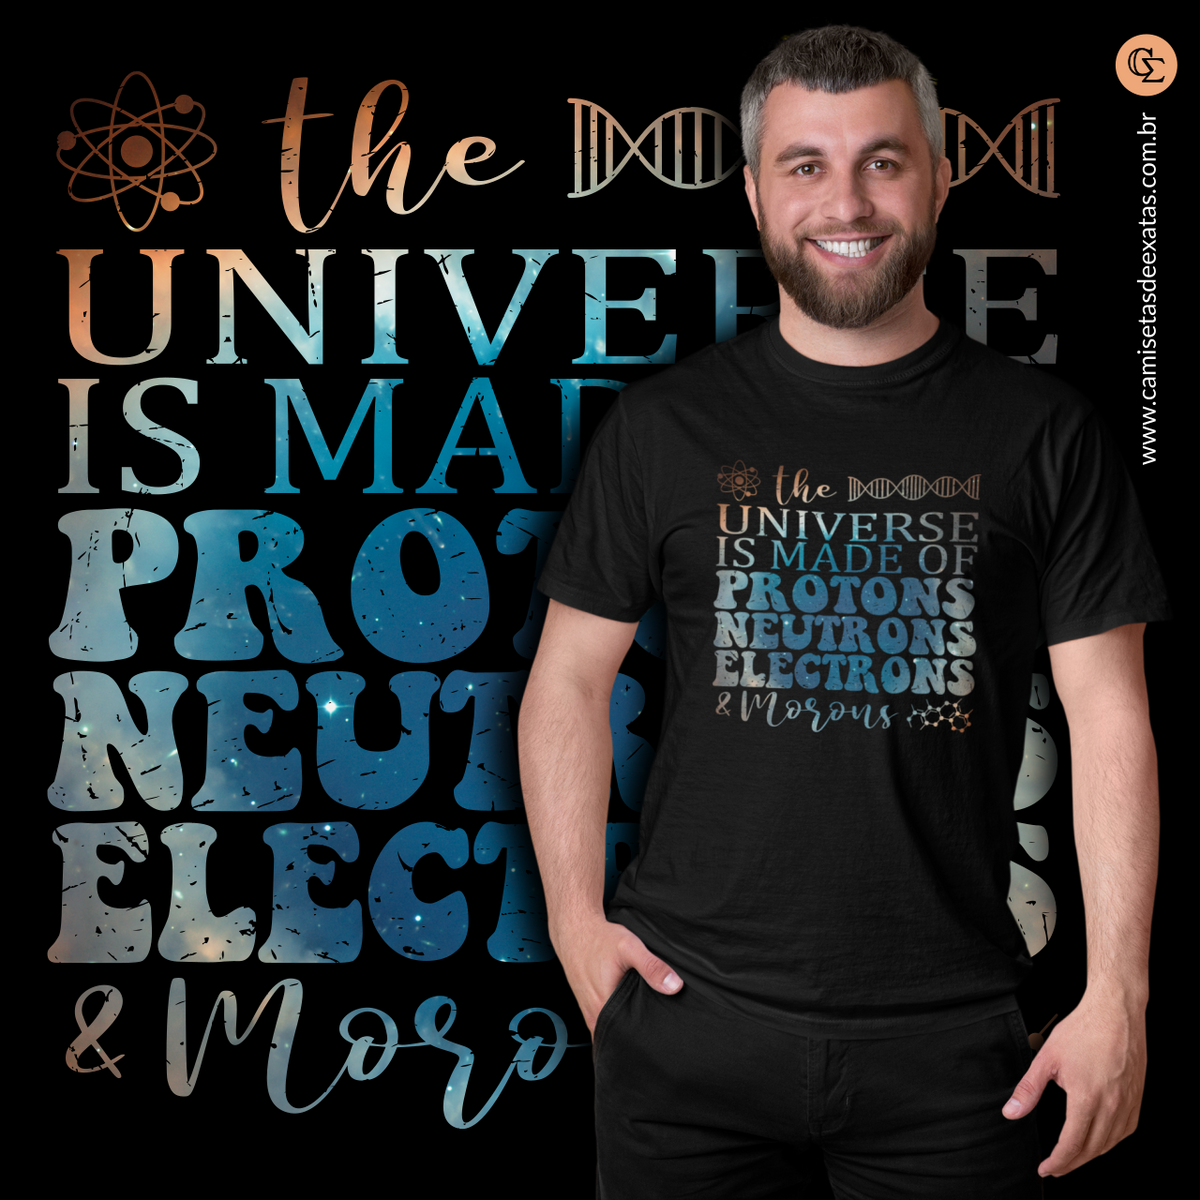 Nome do produto: THE UNIVERSE IS MADE OF [4.1]